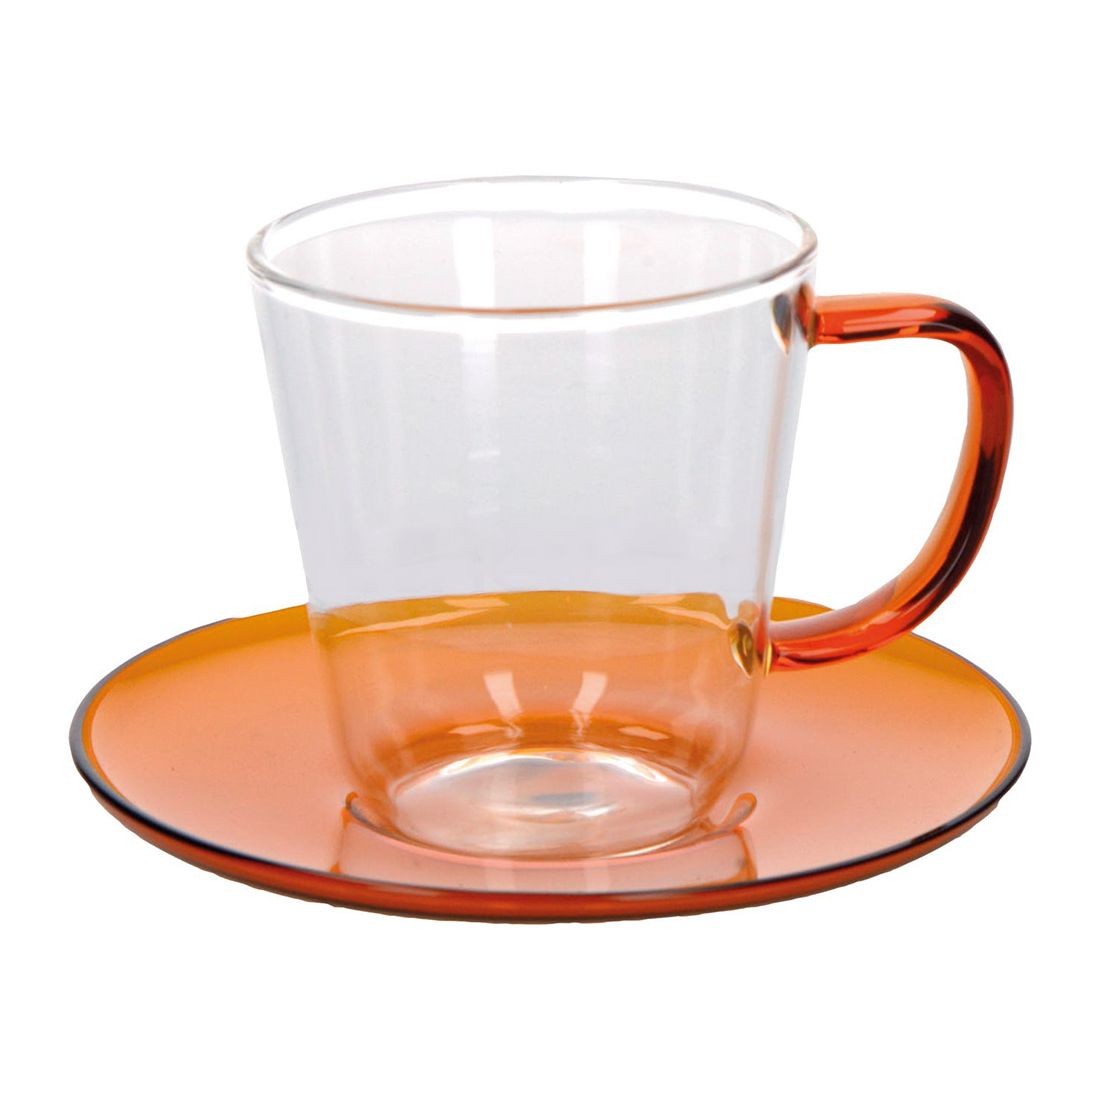 Kitchencraft L.A. Cafetiere Amber-Coloured Glass Tea Cup & Saucer 240ml